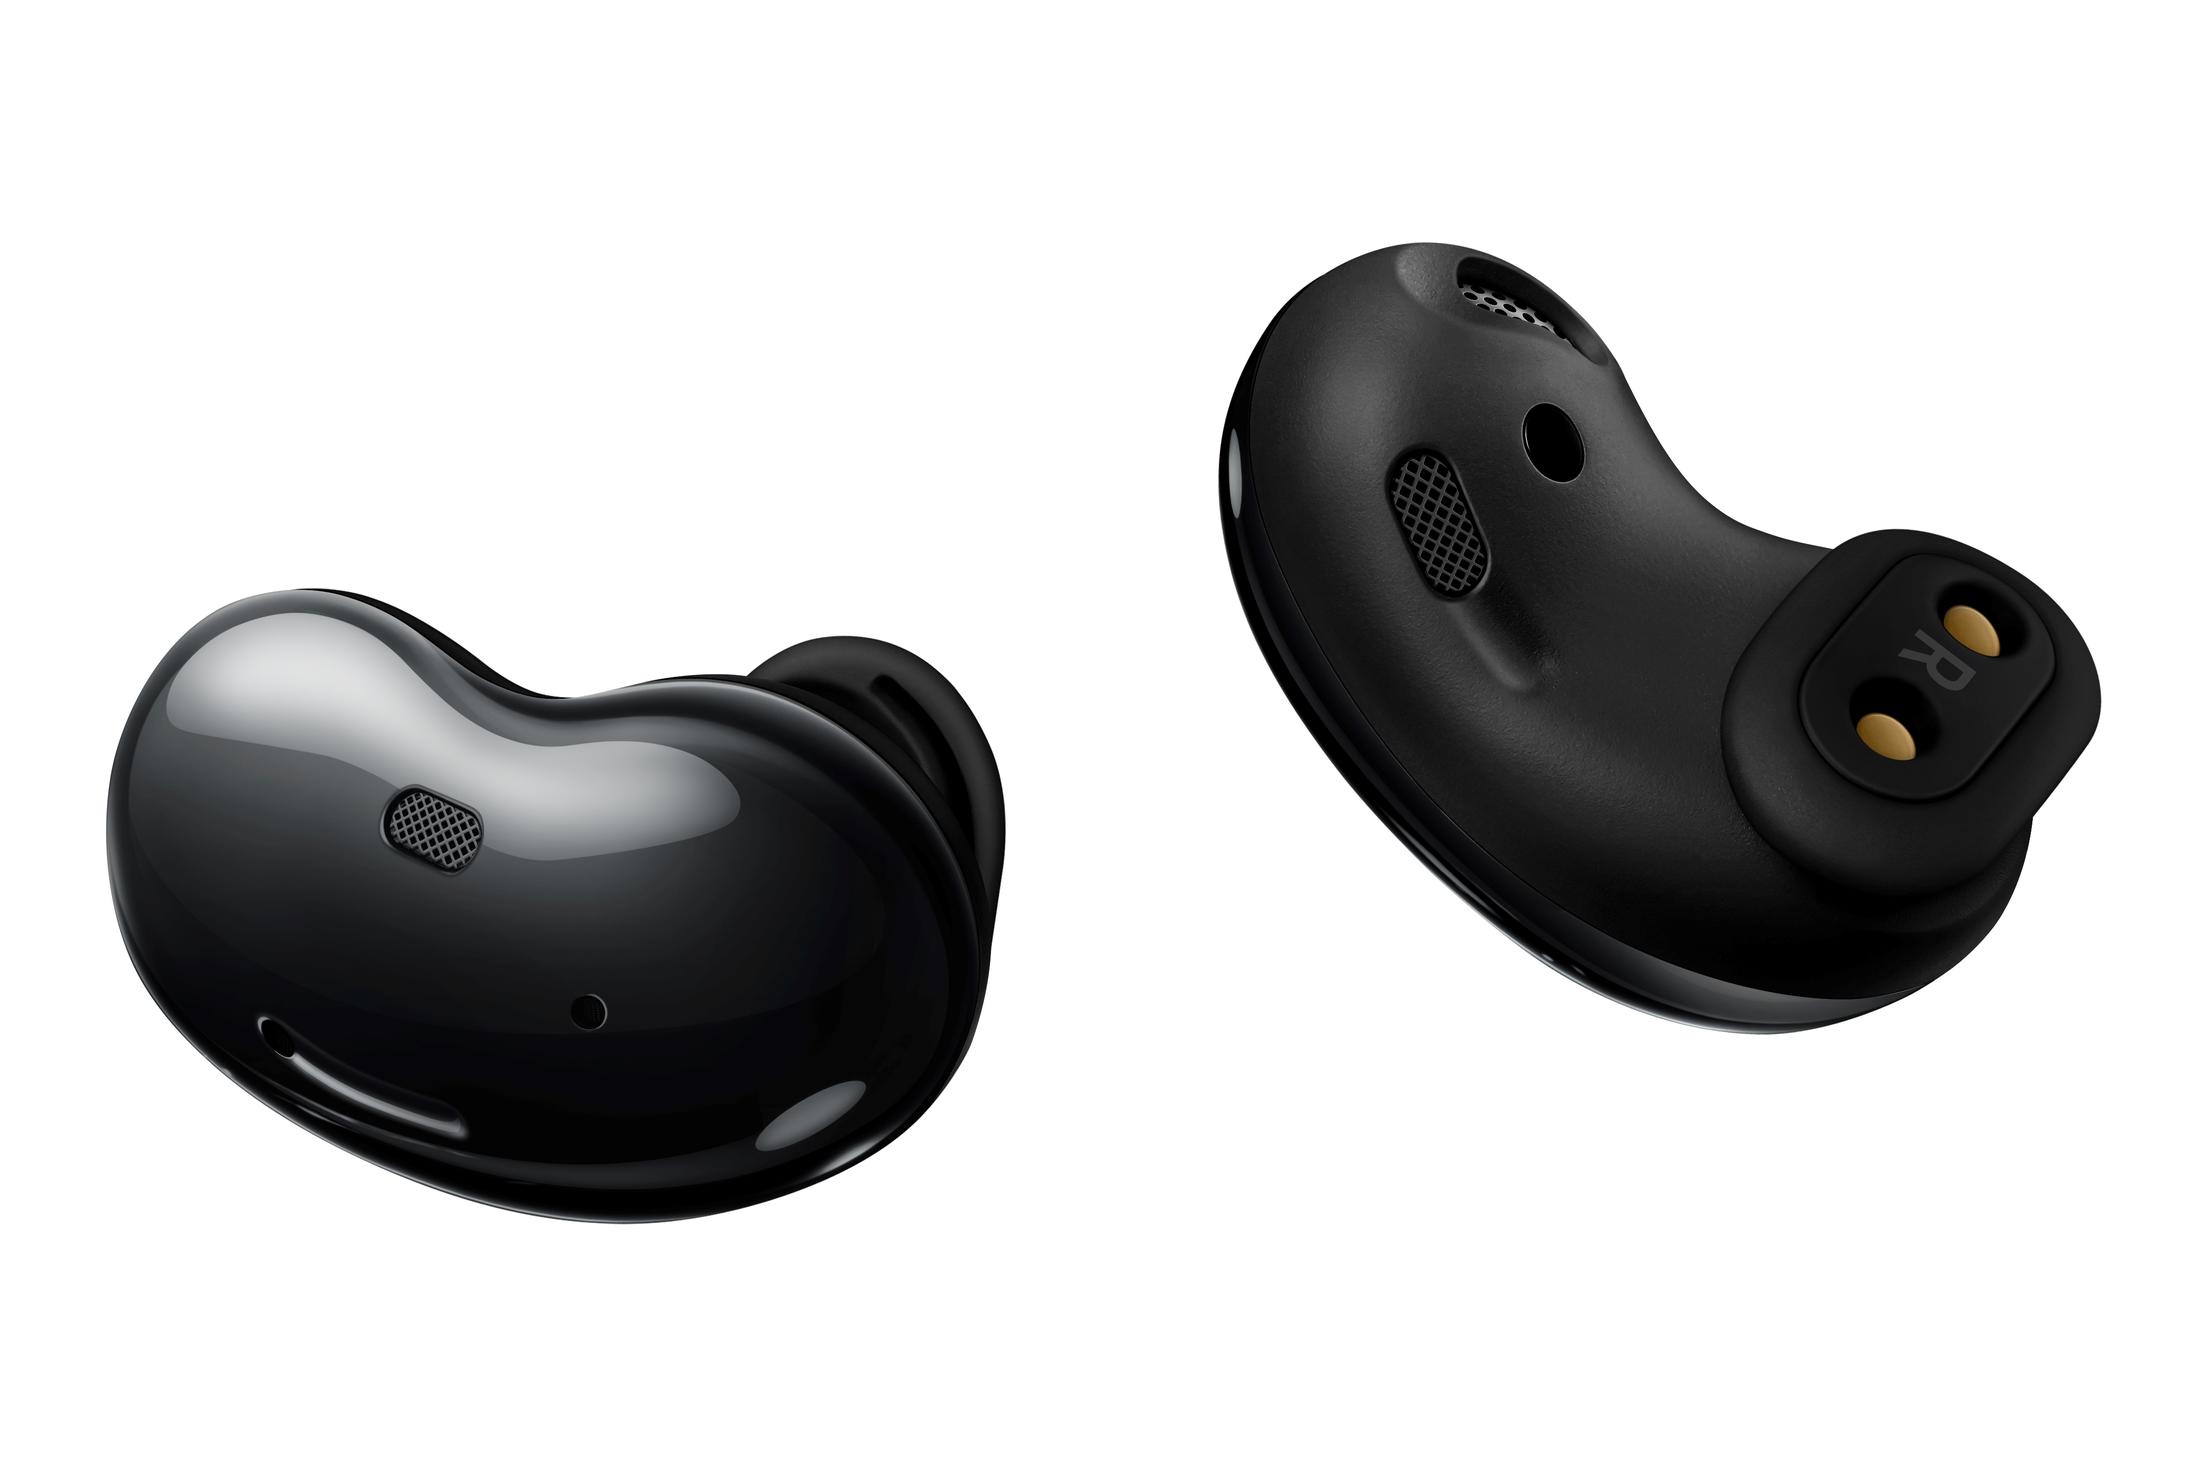 Samsung Galaxy Buds Live Bluetooth Earbuds, Noise Canceling and True Wireless, Onyx Black - image 8 of 12